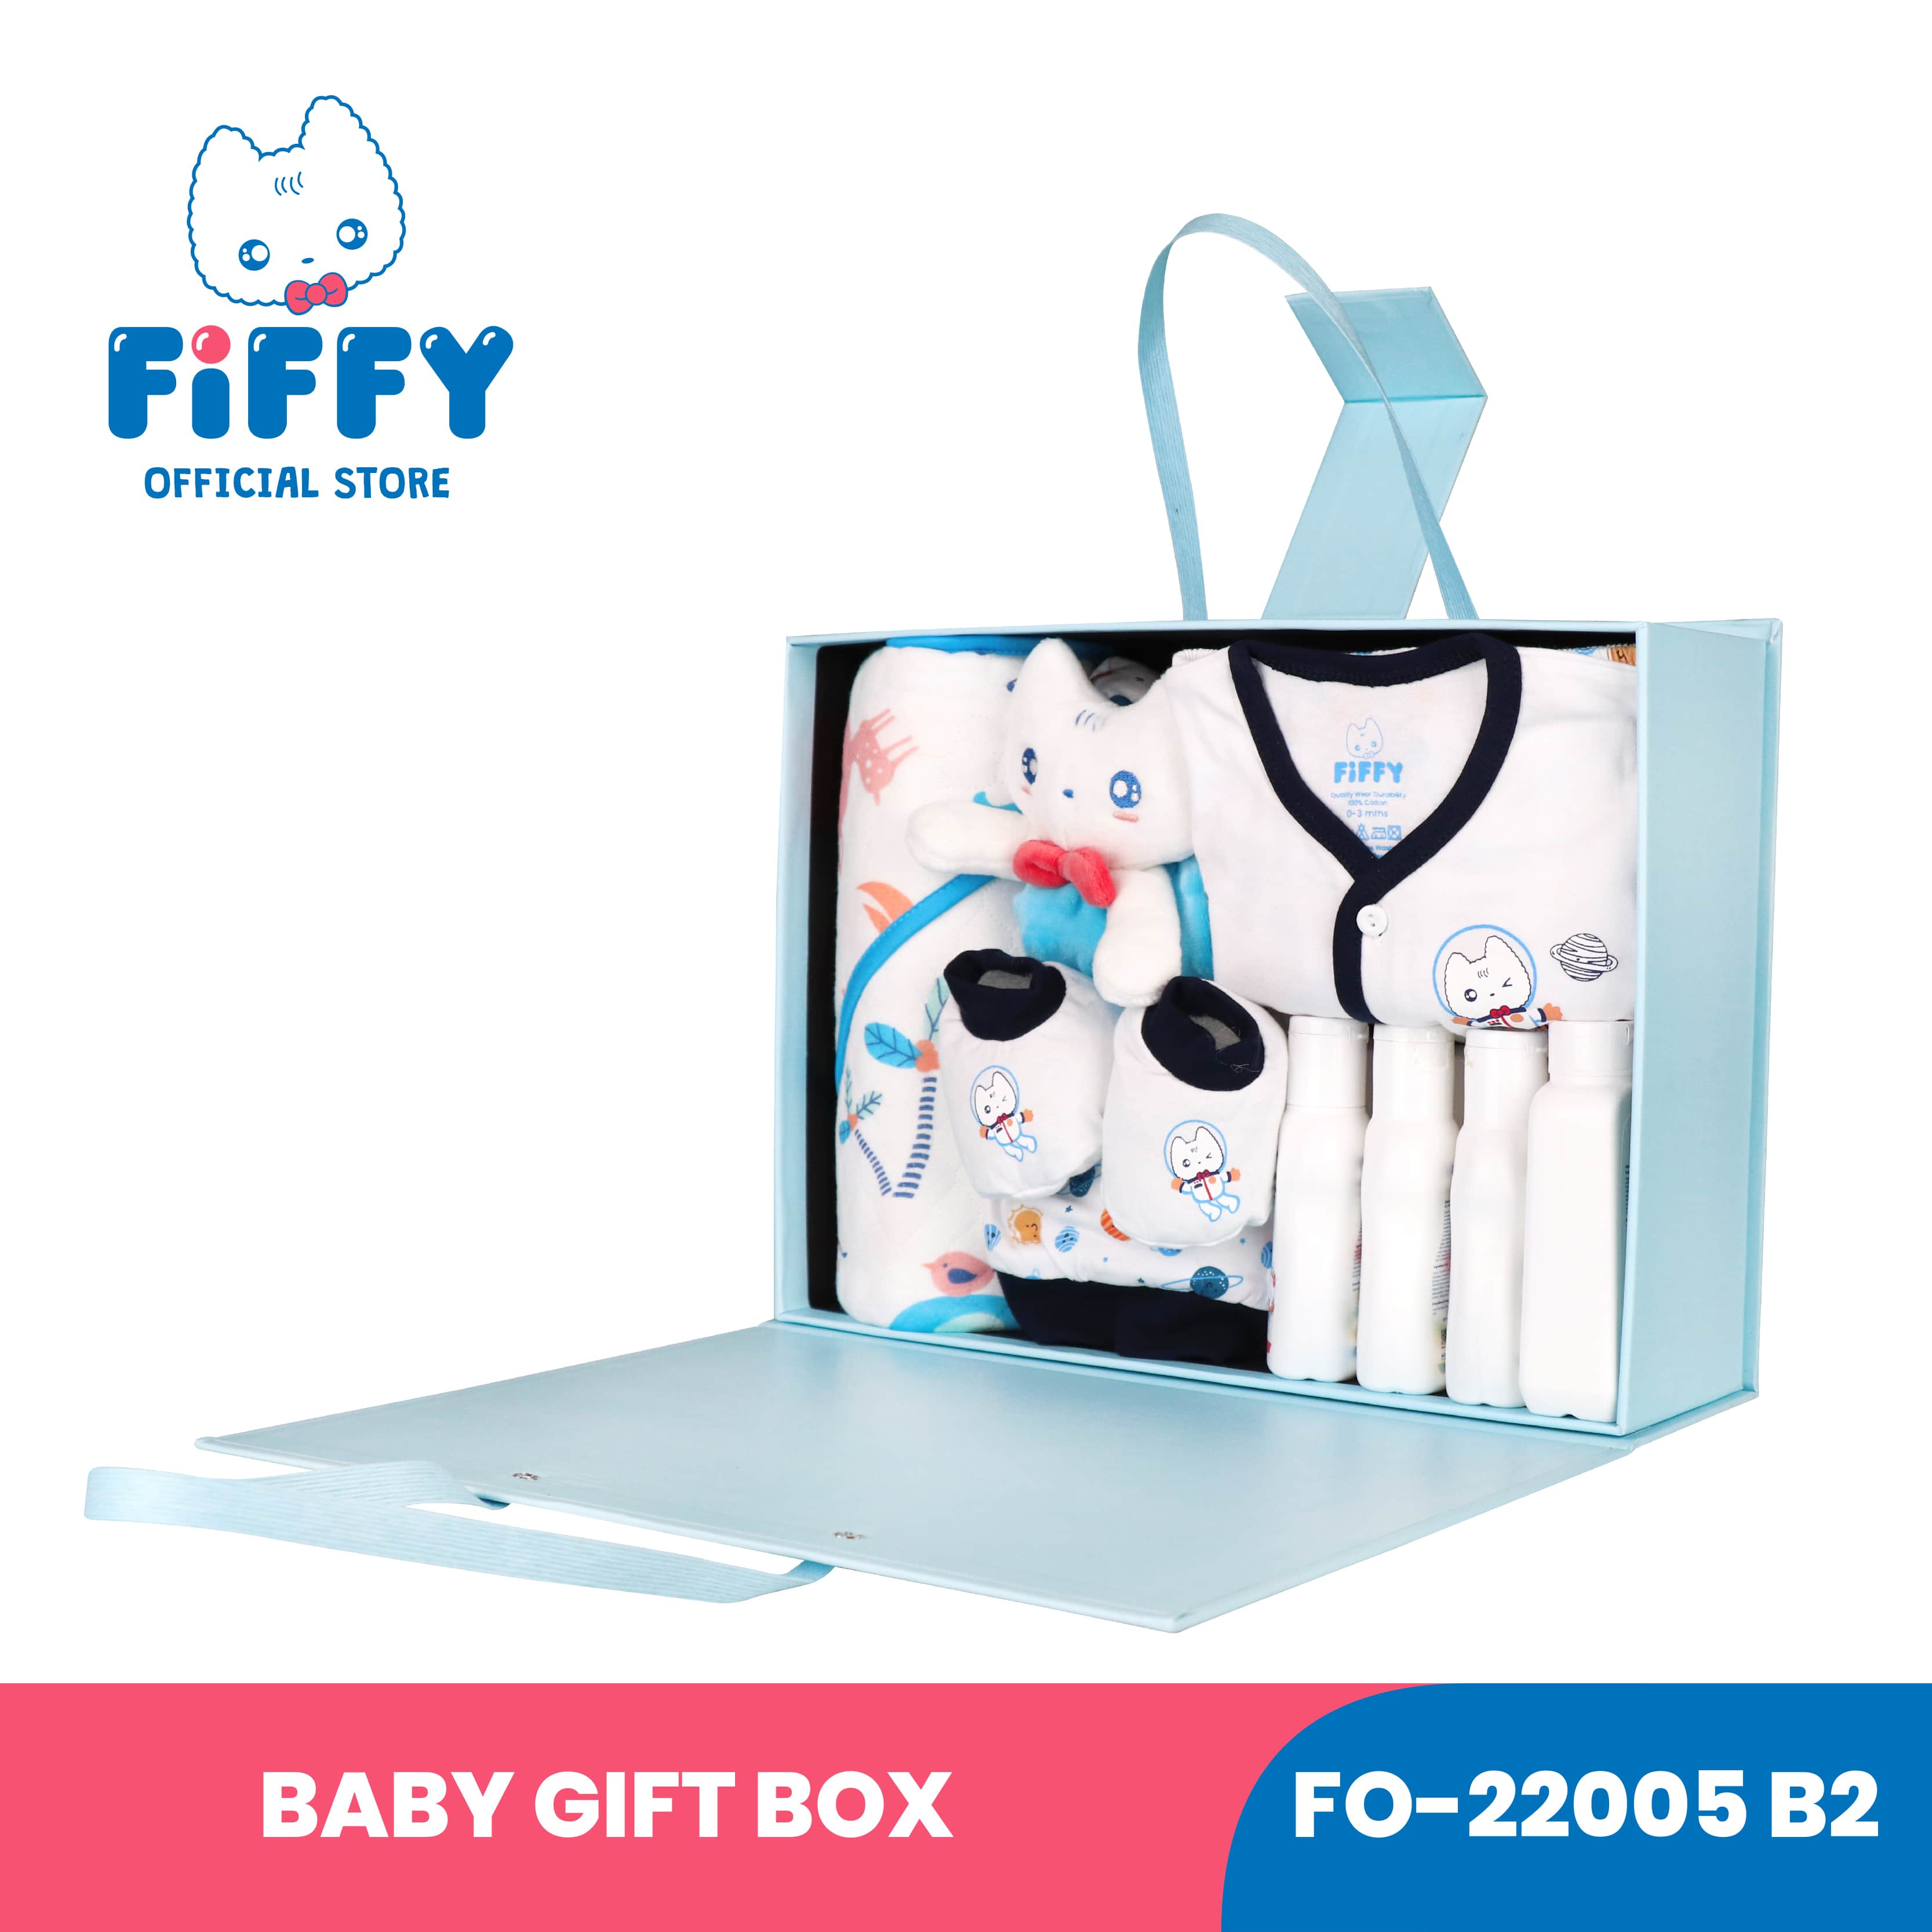 FIFFY ADORABLE SPACE SERIES BABY GIFT BOX